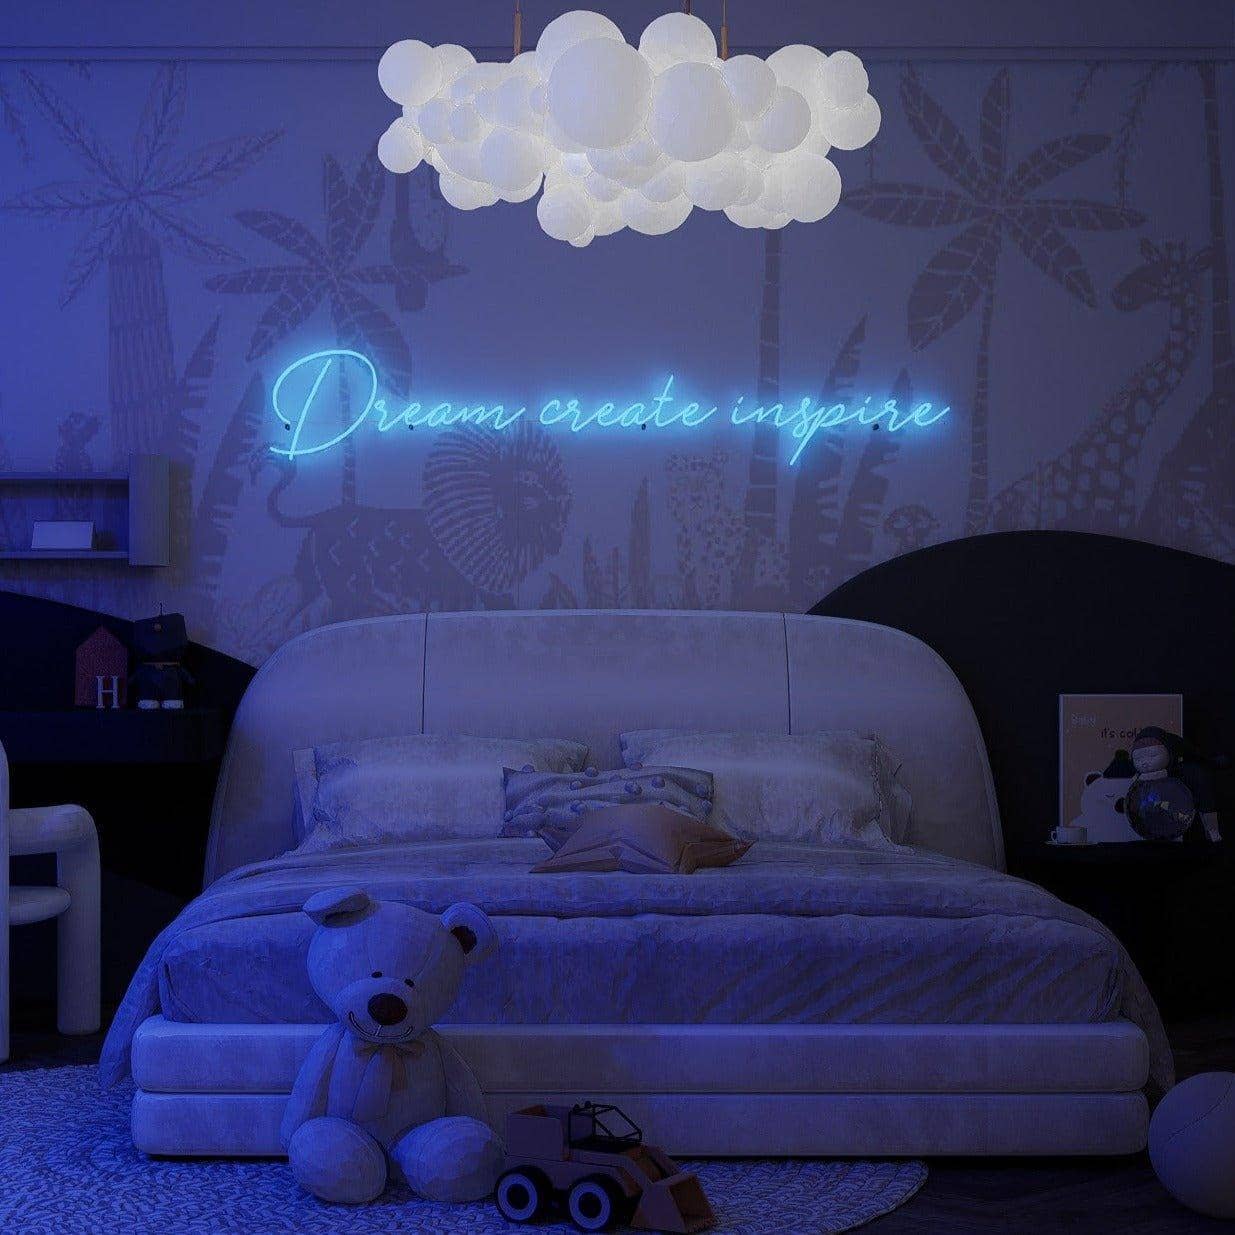 light-up-blue-neon-lights-and-hang-them-in-the-bedroom-for-display-at-night-dream-creat-inspire